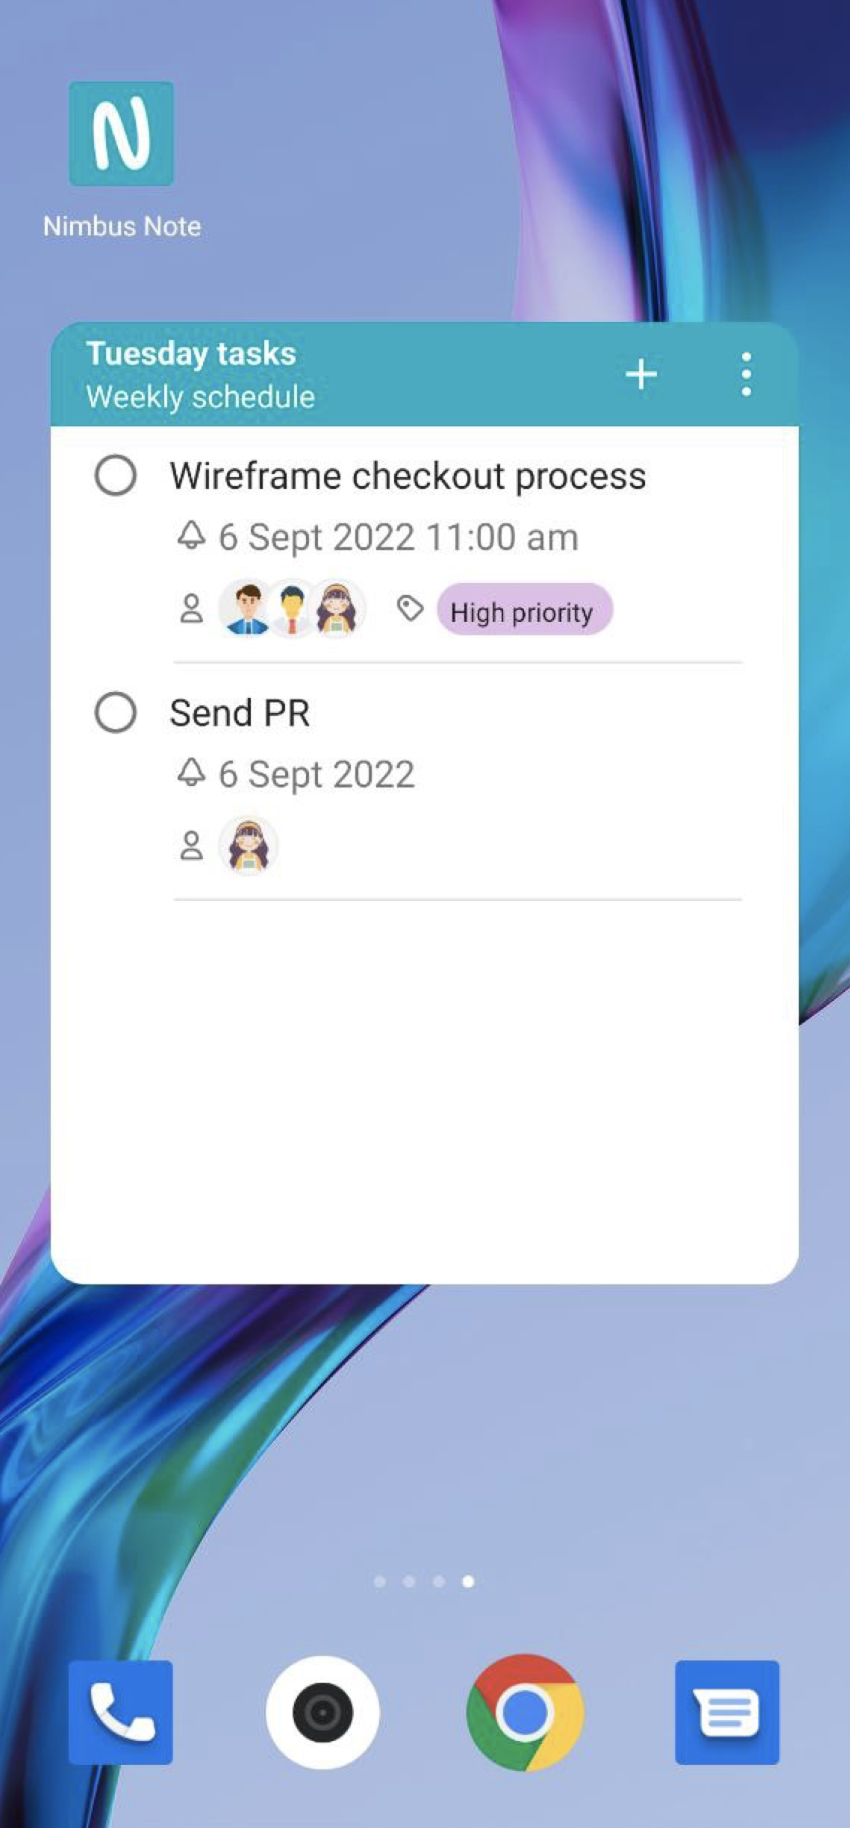 Large task list widget allows to view tasks from the selected task list, as well as immediately mark tasks as completed and create new tasks. 